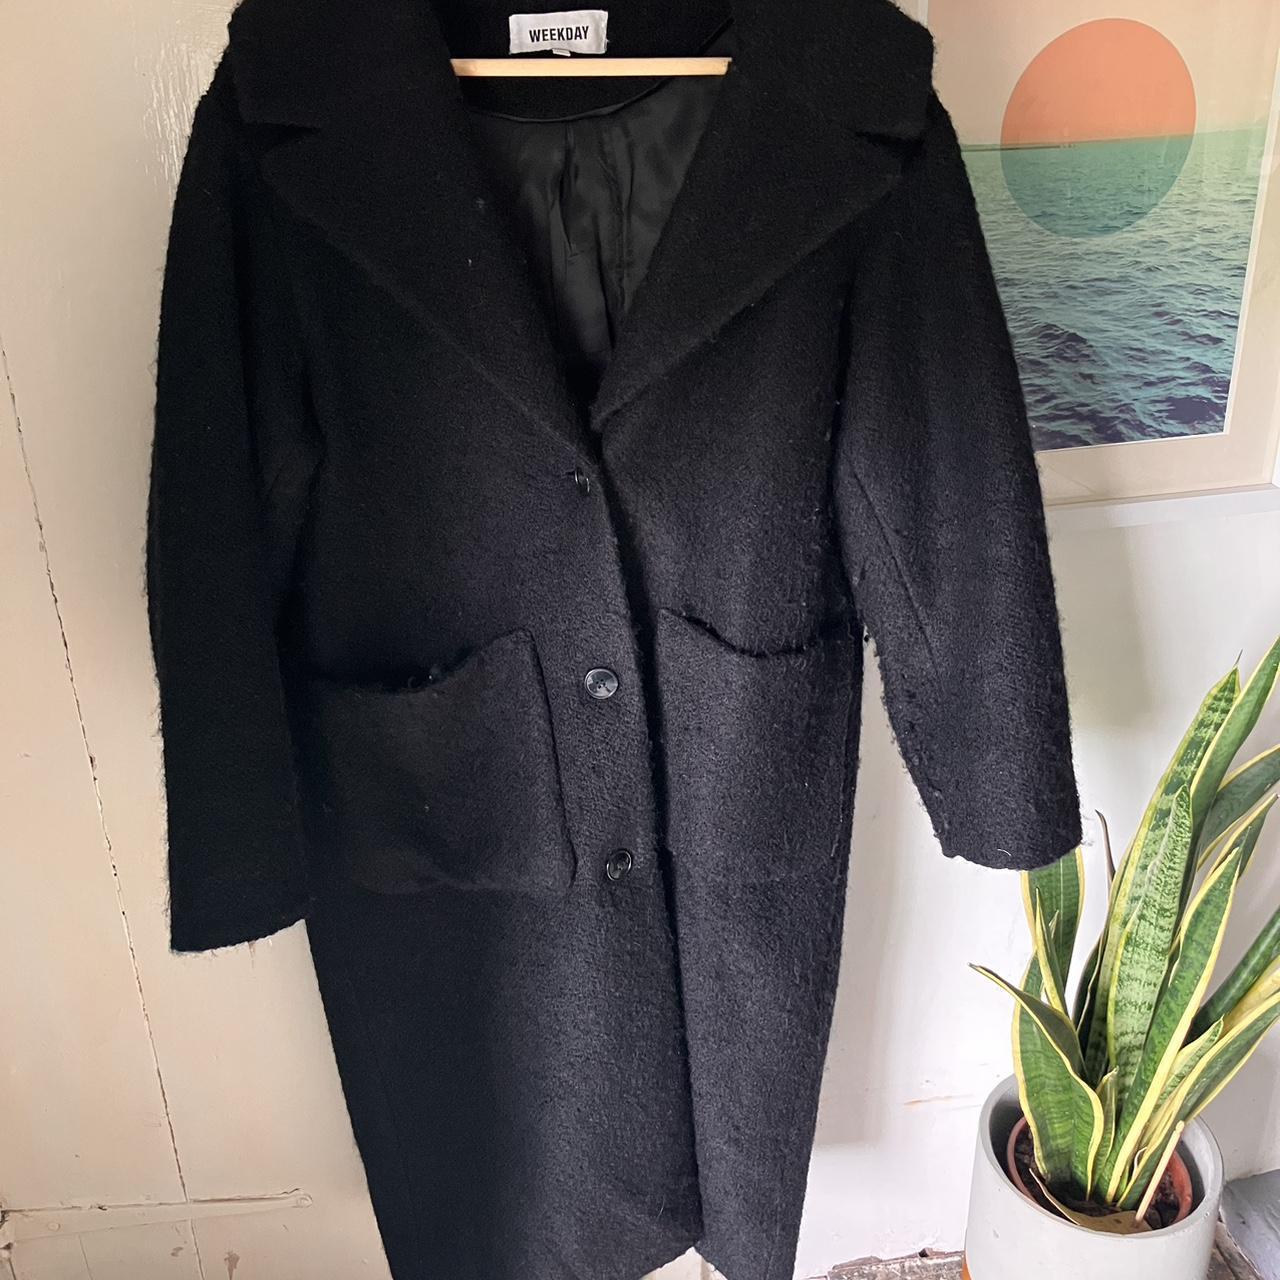 Weekday oversized black fluffy wool coat Thick pile... - Depop